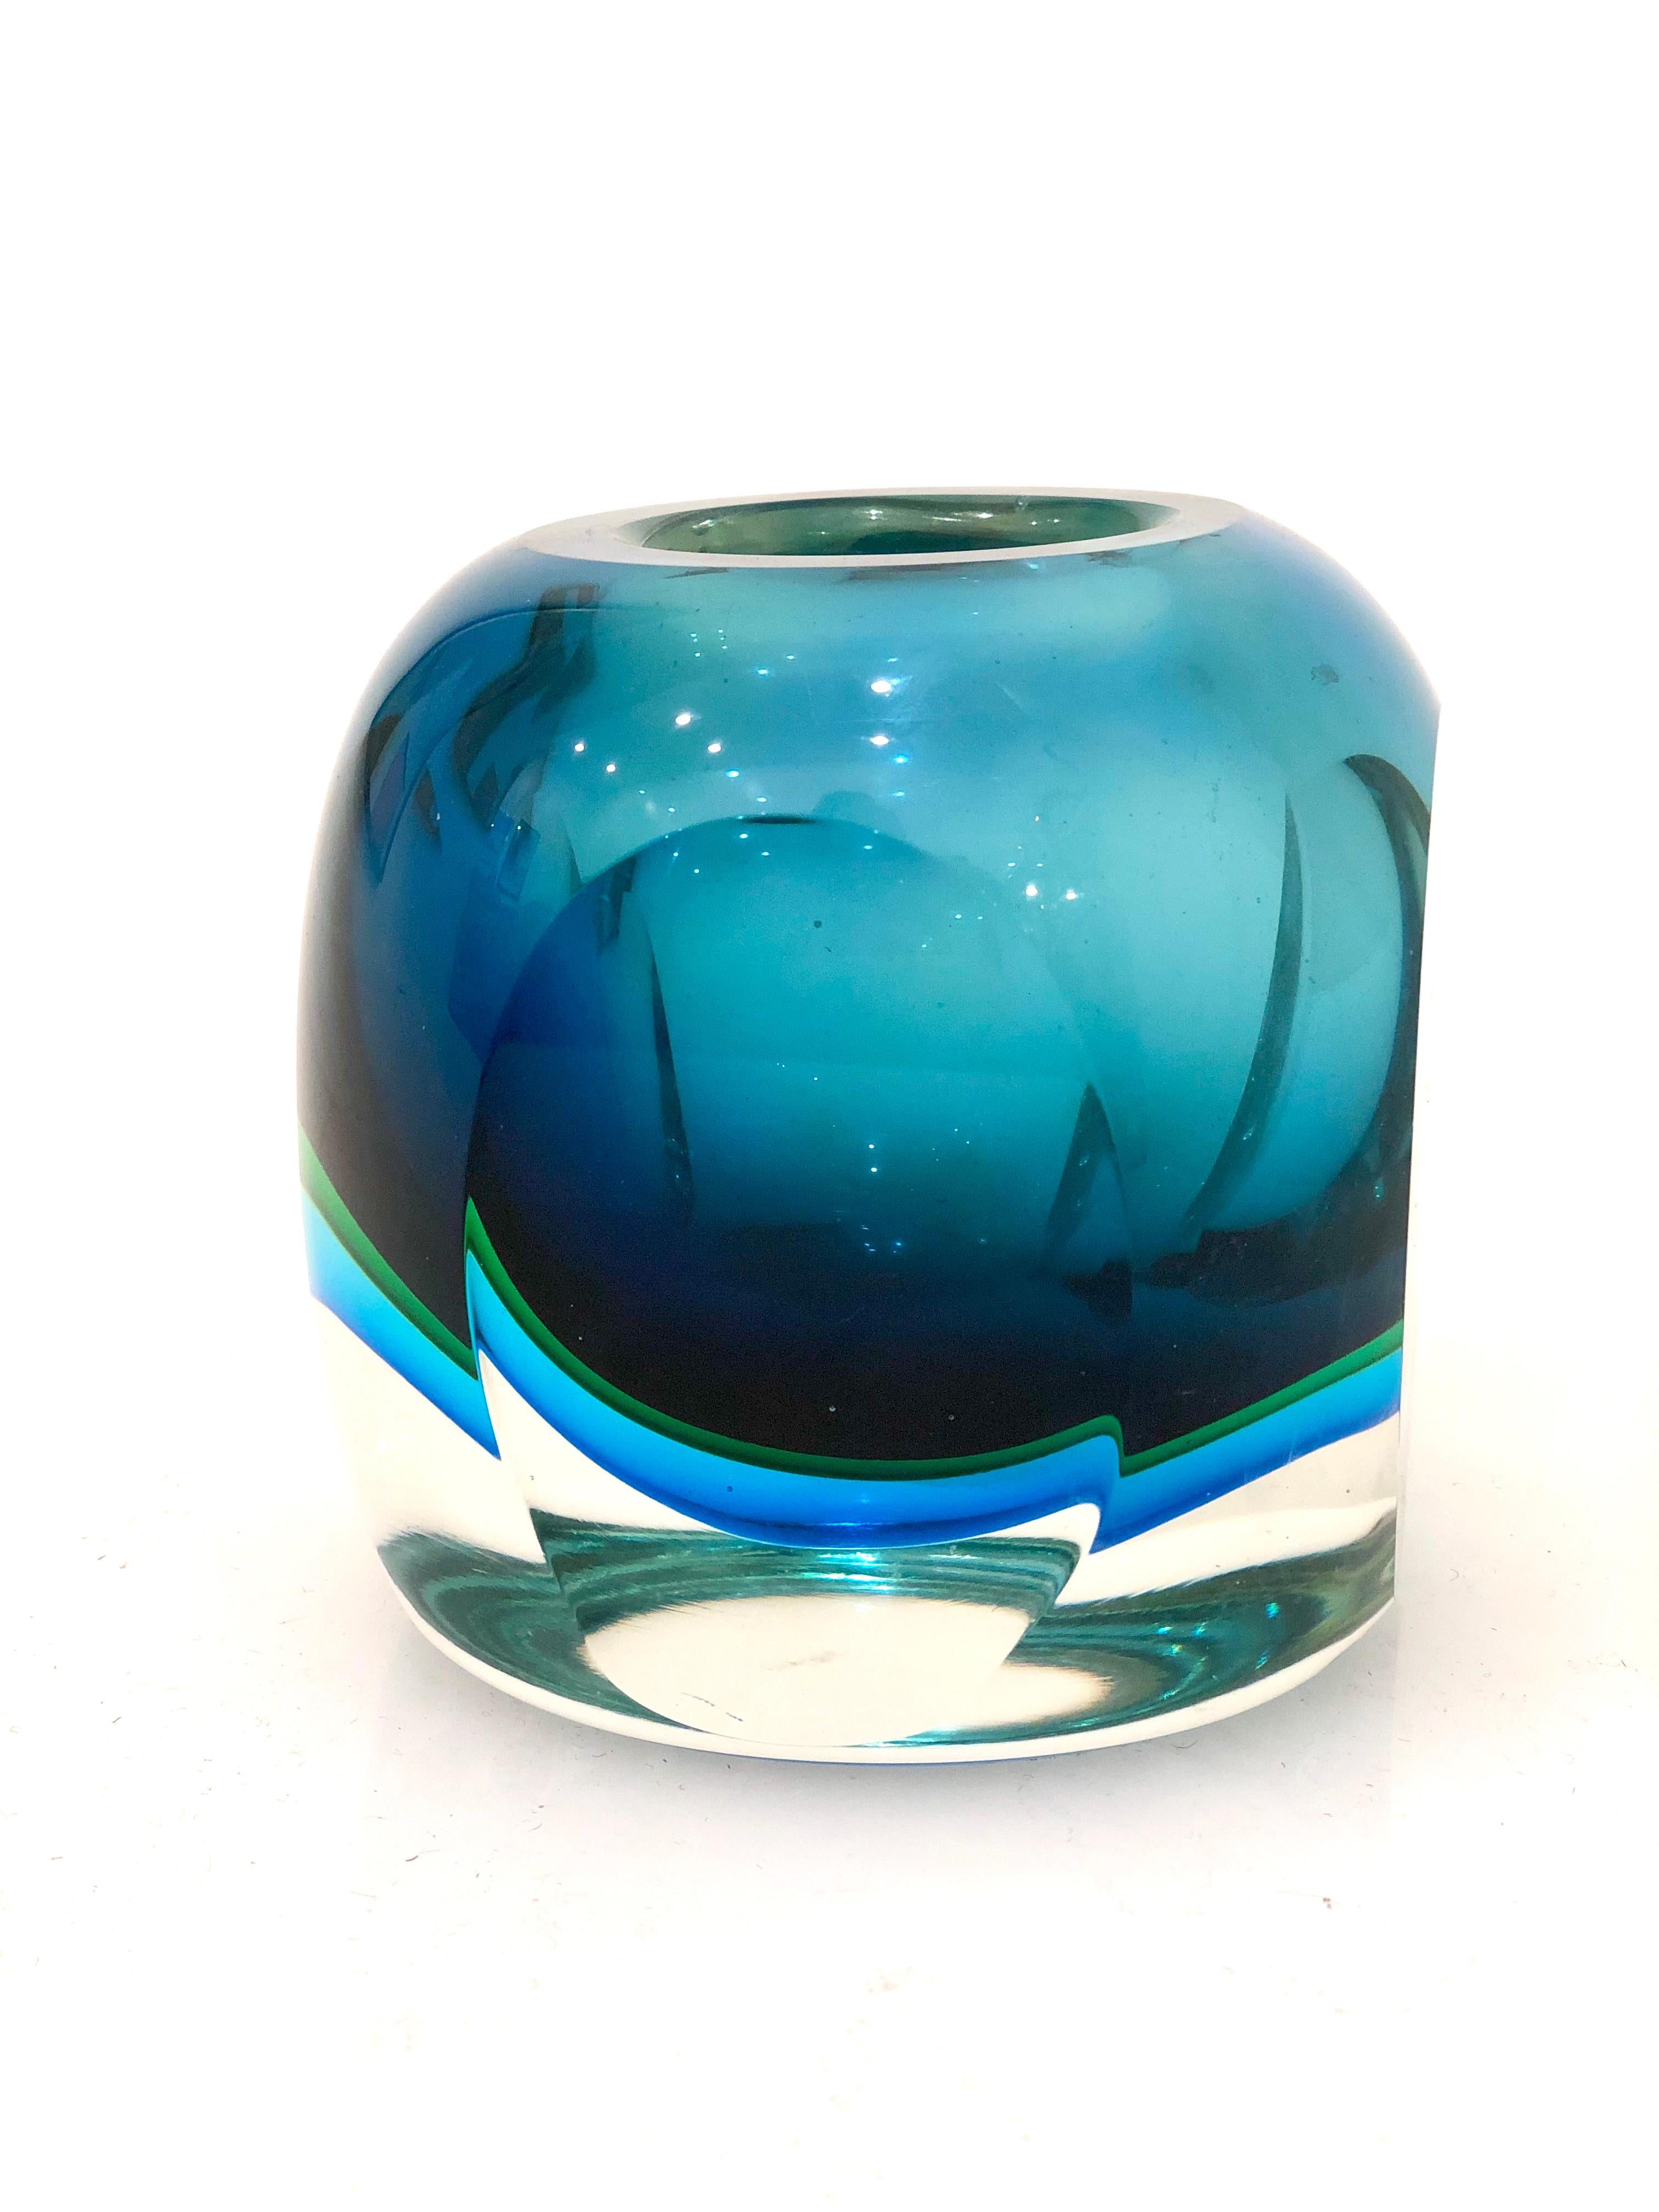 Beautiful deep colors and excellent condition on this 4 sided glass vase, circa 1950s.